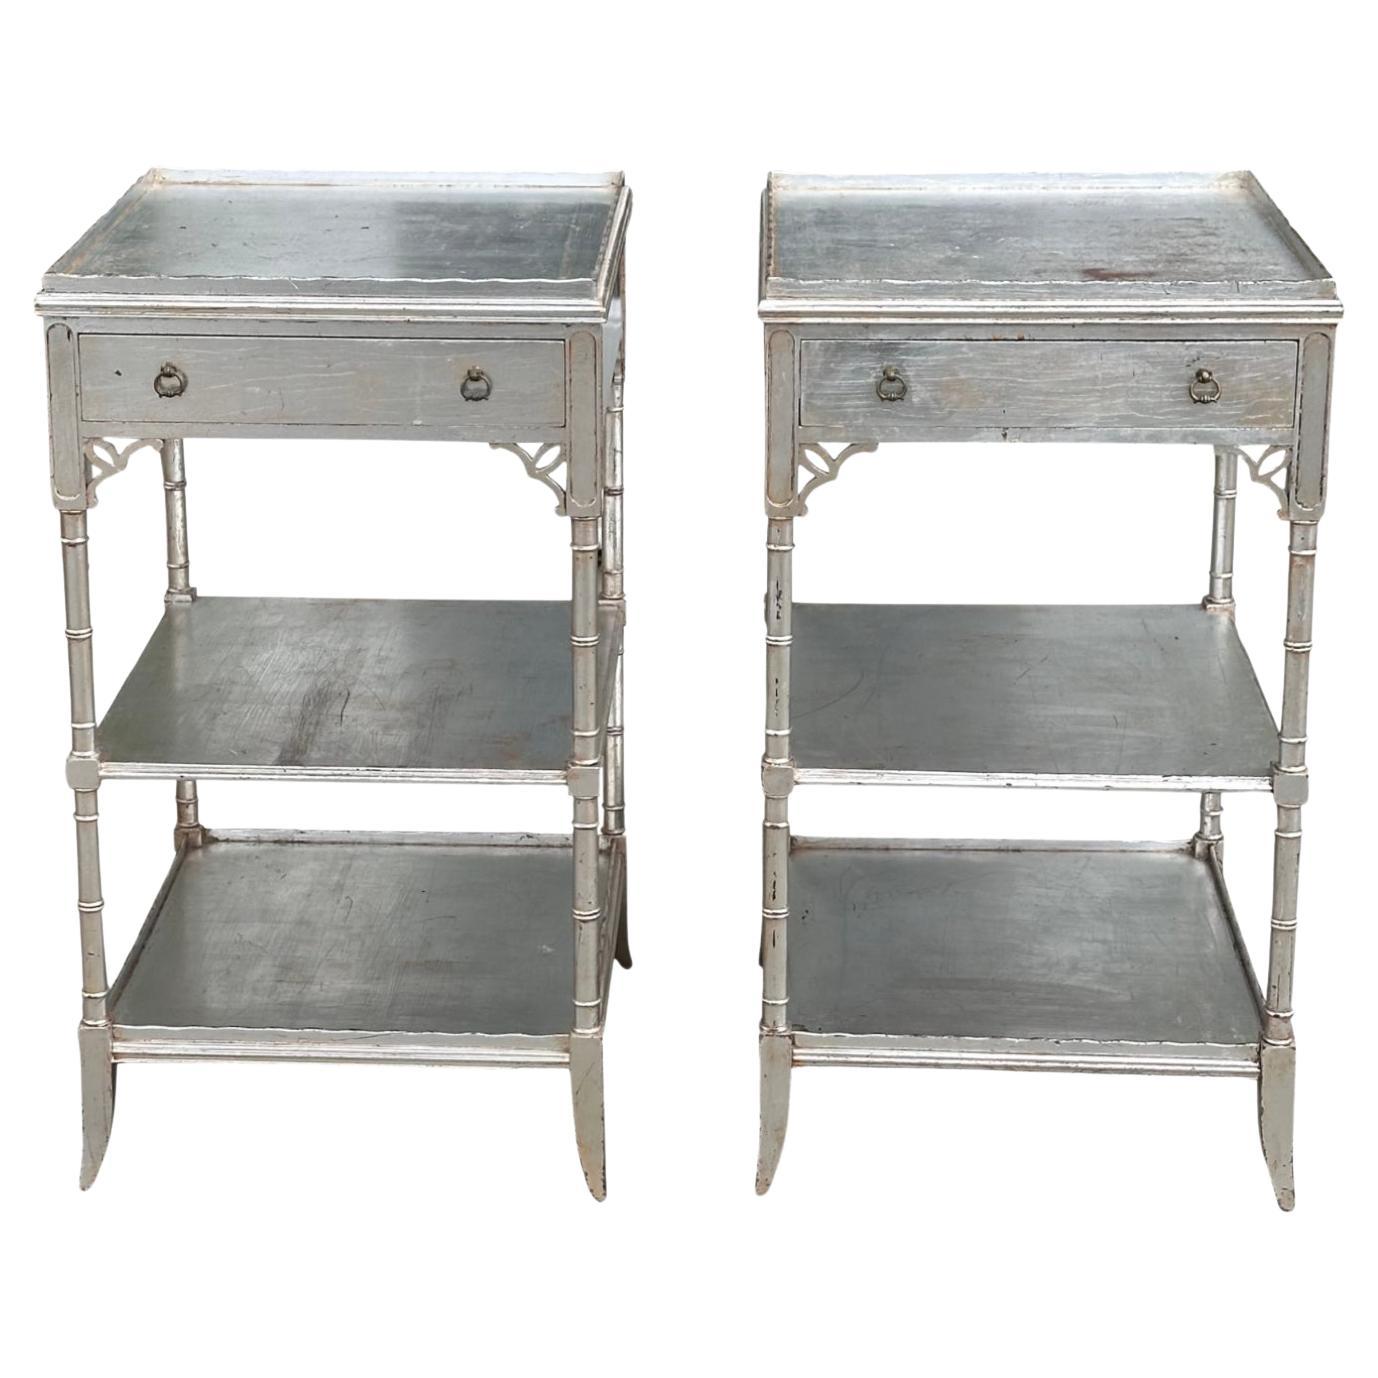 Pair of Faux Bamboo Hollywood Regency Silver End Table Nightstands